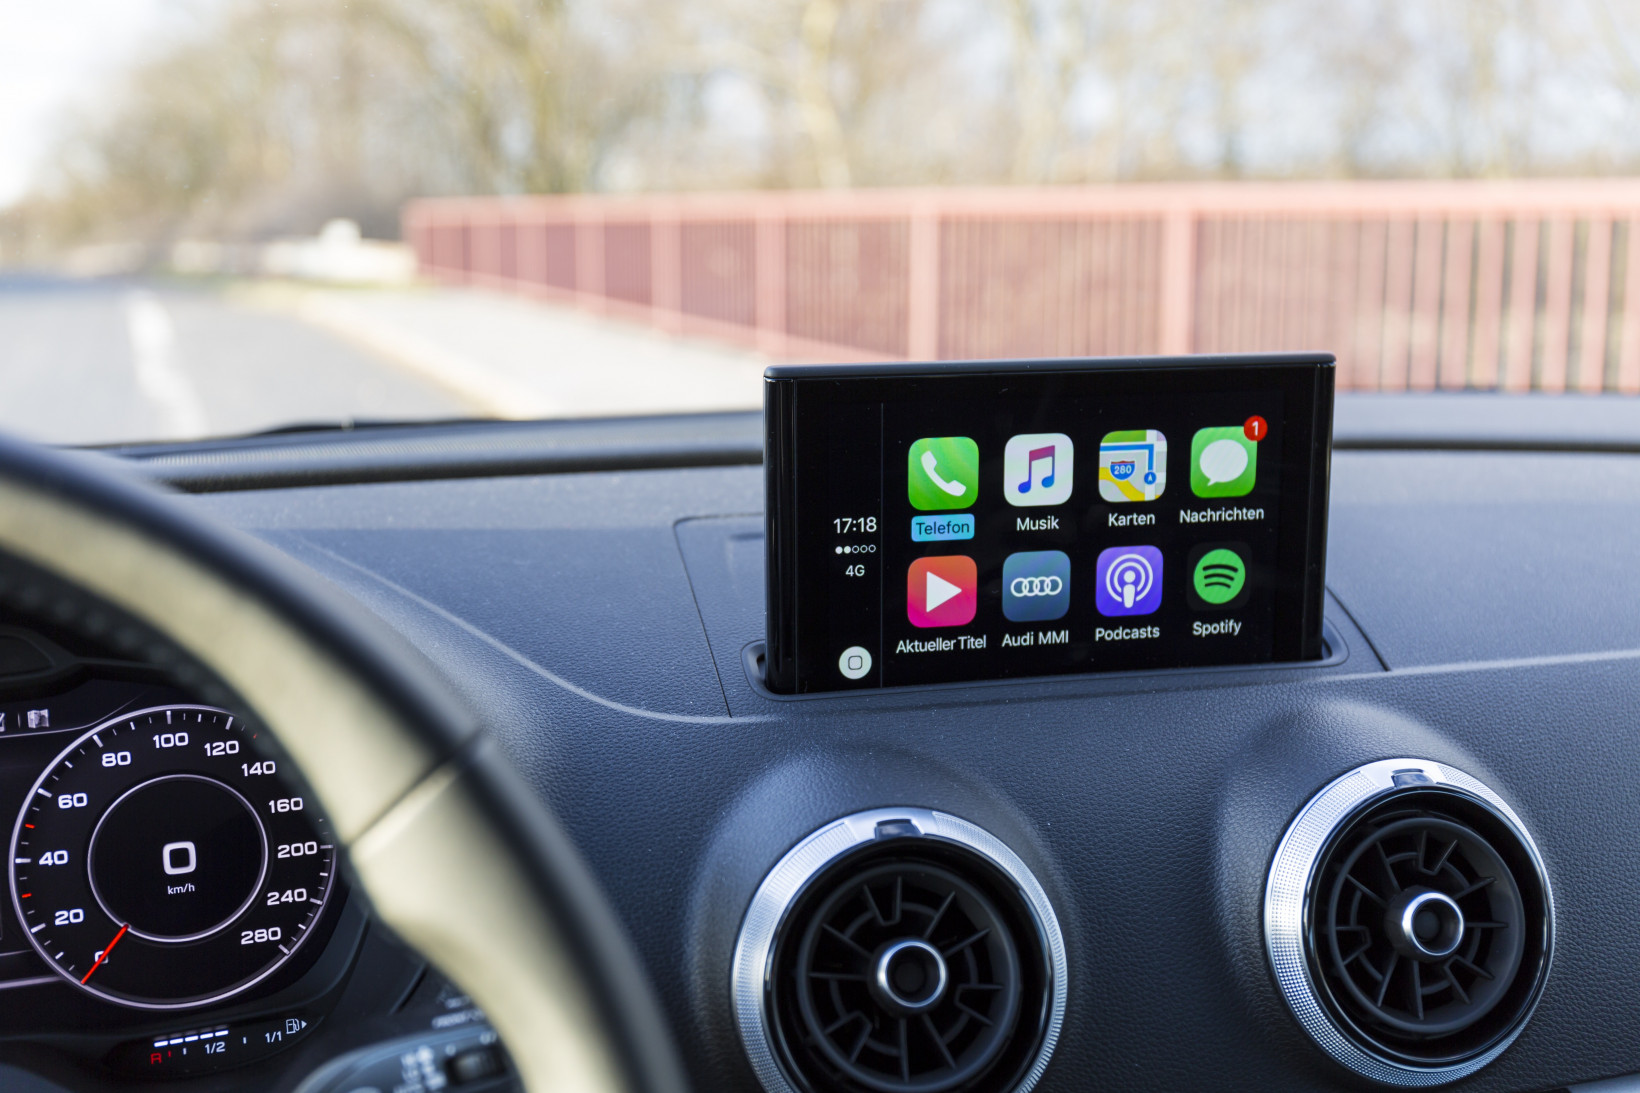 Car owners can’t get their phone to talk to their in-car entertainment